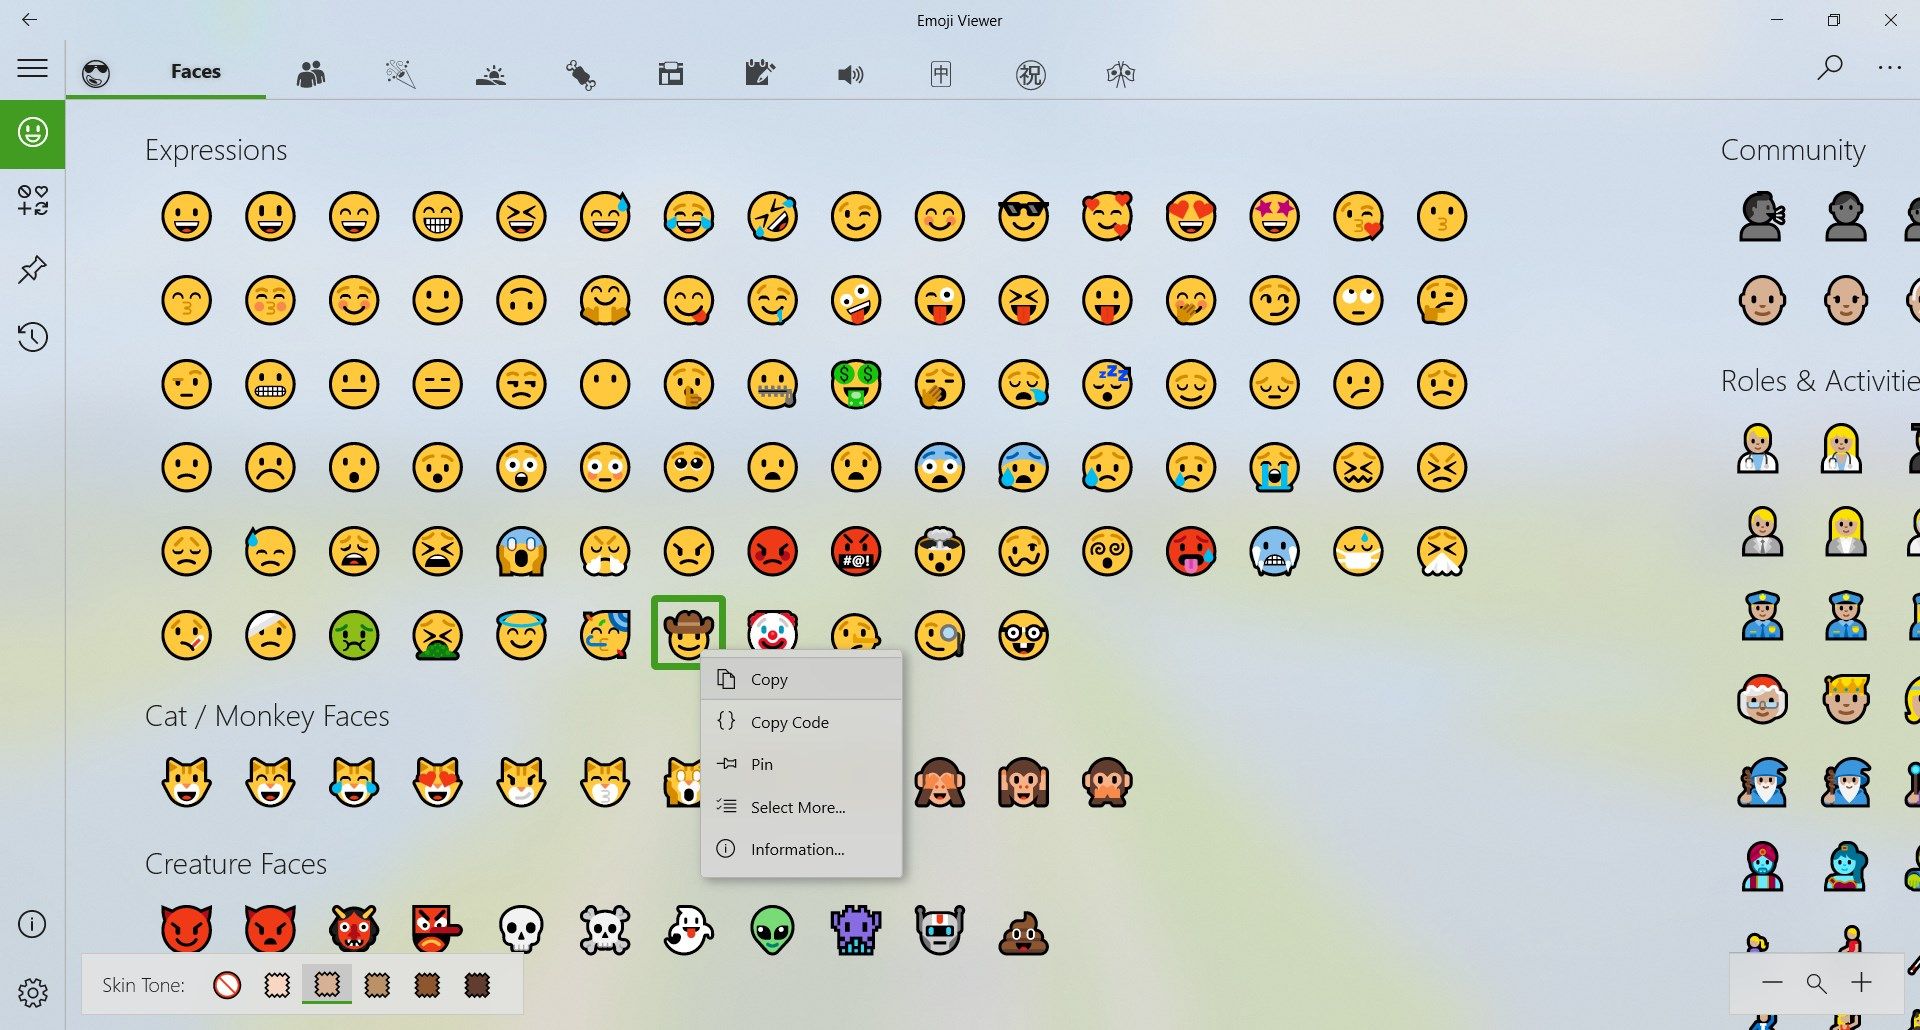 Copy Emoji / Symbols to Clipboard, or View its Details